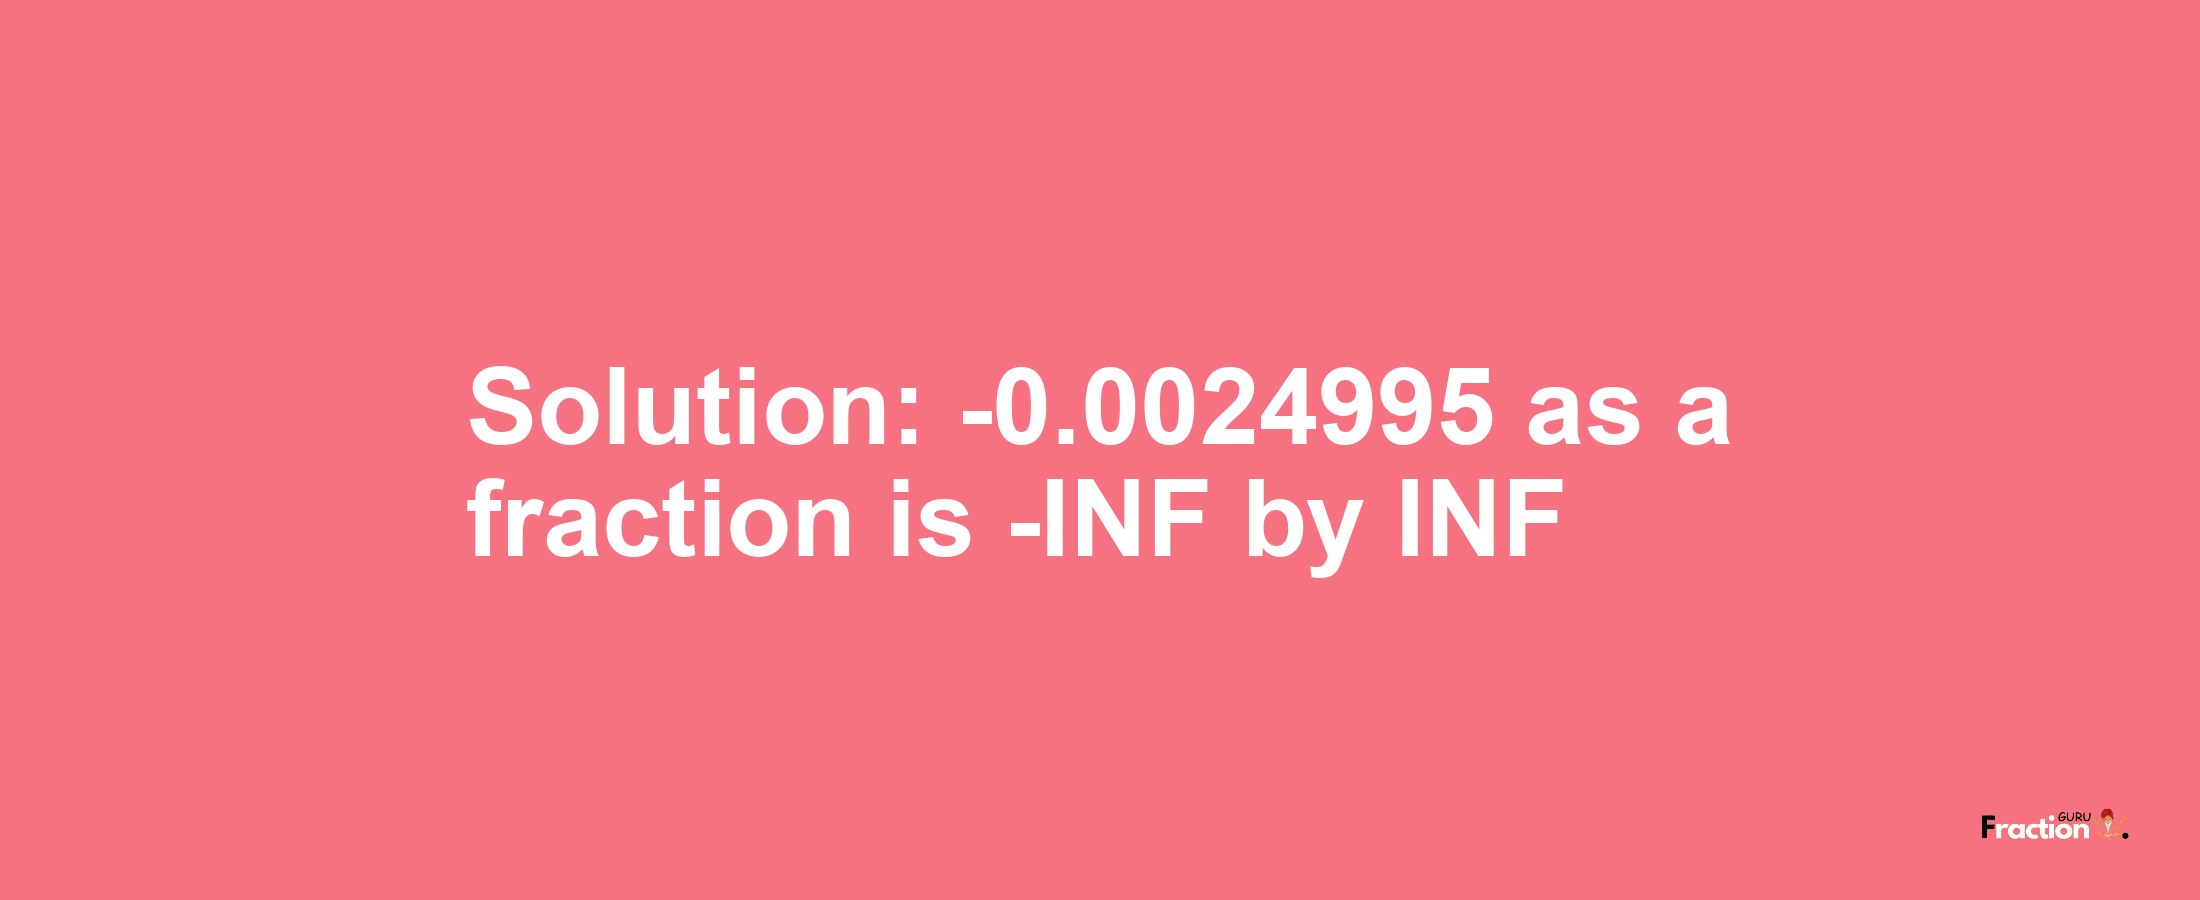 Solution:-0.0024995 as a fraction is -INF/INF